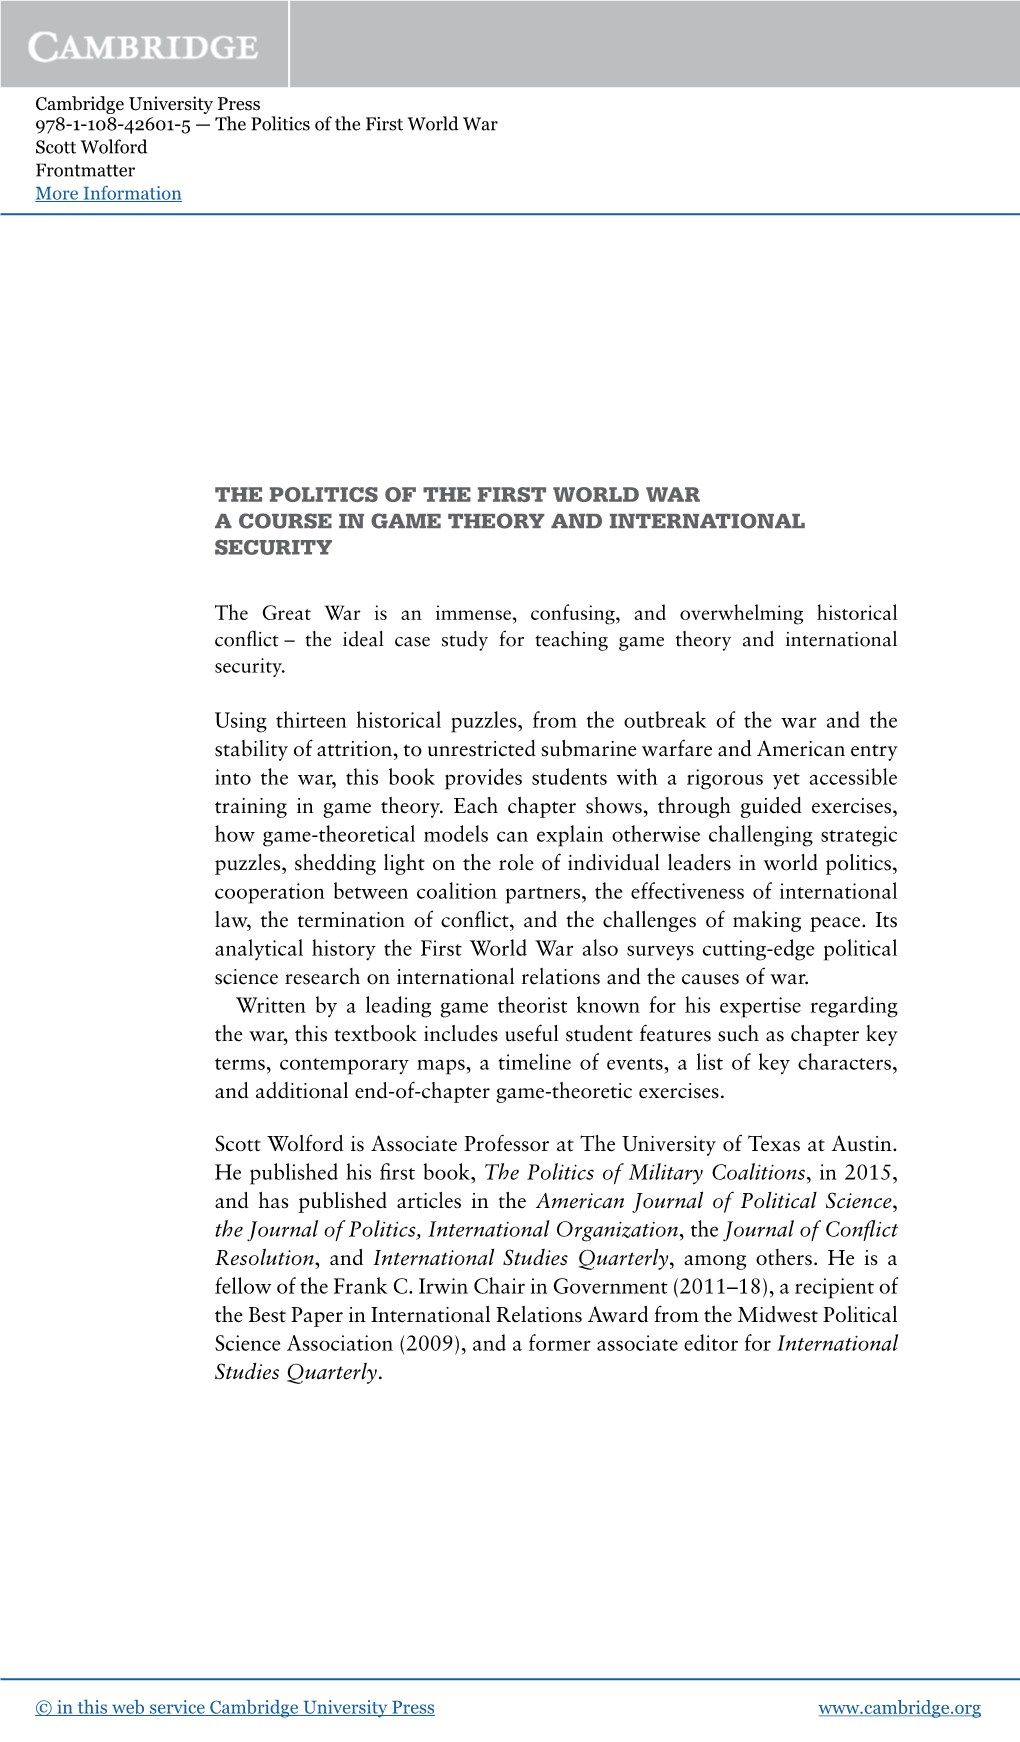 The Politics of the First World War a Course in Game Theory and International Security